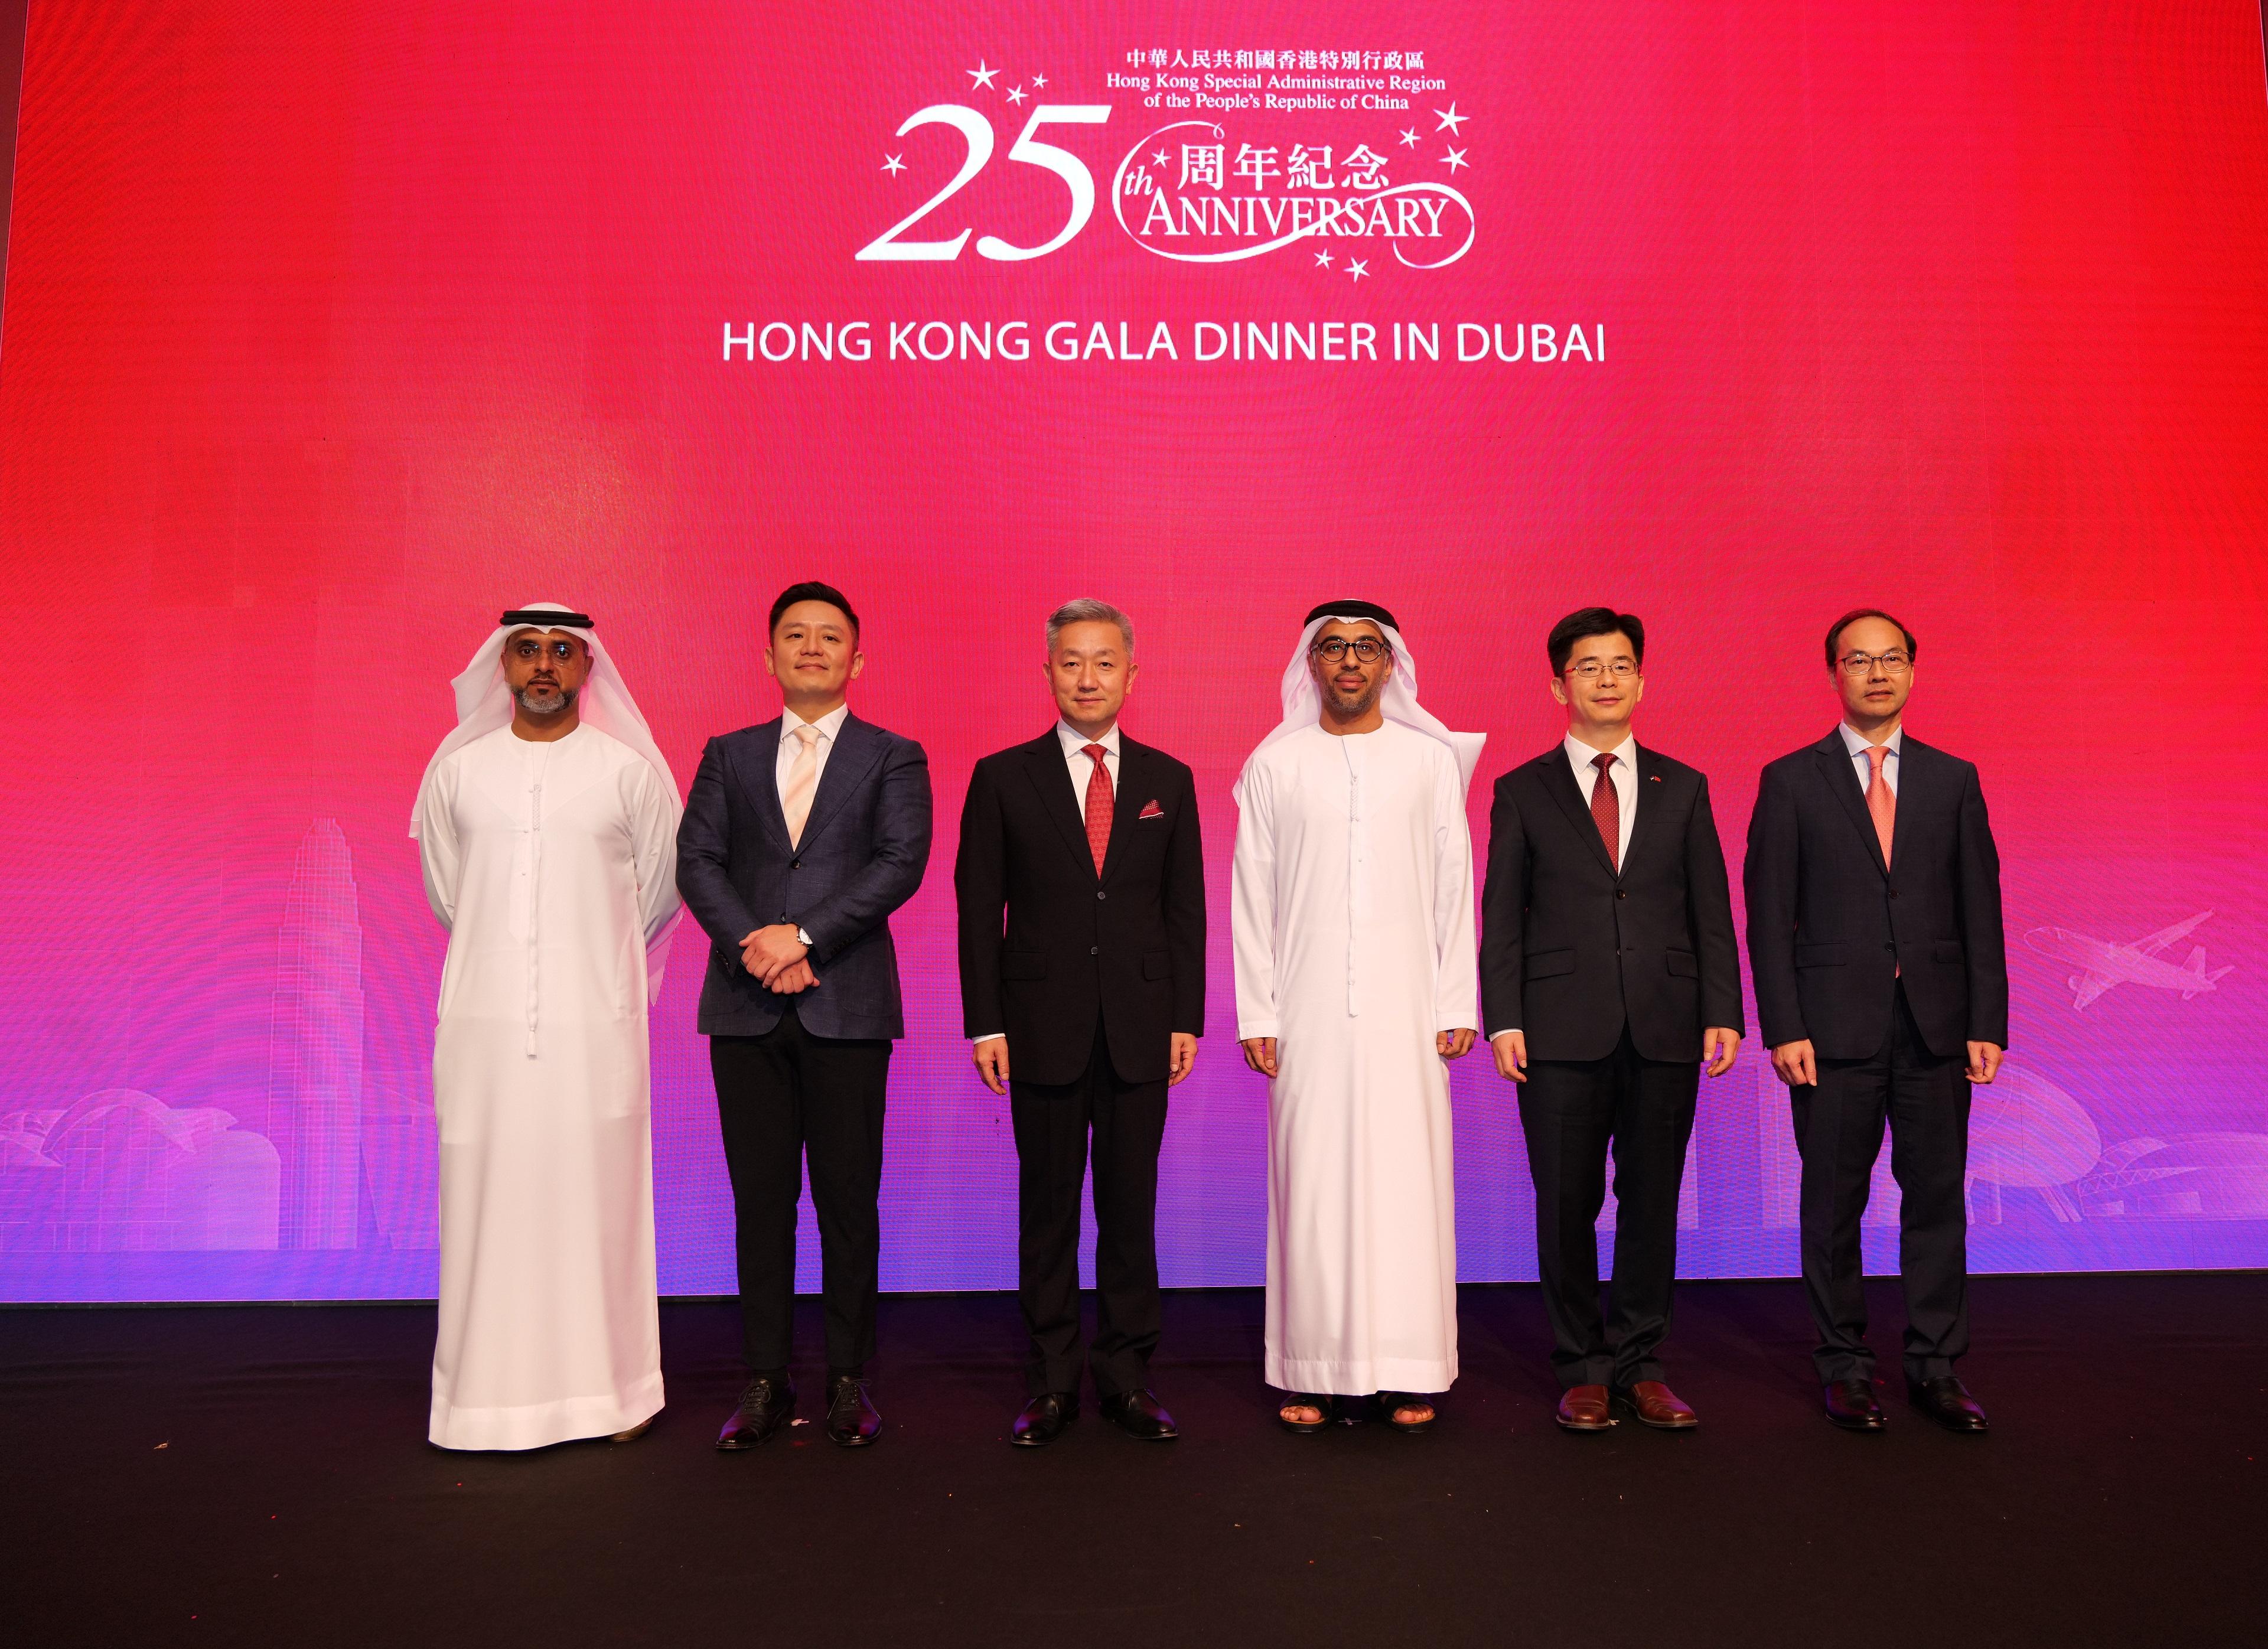 The Hong Kong Economic and Trade Office in Dubai (Dubai ETO) held a gala dinner in Dubai on September 21 (Dubai time) to celebrate the 25th anniversary of the establishment of the Hong Kong Special Administrative Region. Photo shows guests attending the event on the stage. They are (from left) the Deputy Chief Executive Officer of the Dubai Industries and Exports, Mr Mohammad Al Kamali; the Director-General of the Dubai ETO, Mr Damian Lee; the Ambassador Extraordinary and Plenipotentiary of the People's Republic of China to the United Arab Emirates, Mr Zhang Yiming; the Assistant Undersecretary for Entrepreneurship and SMEs, the Ministry of Economy of the United Arab Emirates, His Excellency Mr Faisal Al Hammadi; the Consul General of the People's Republic of China in Dubai, Mr Li Xuhang; and the Regional Director of Middle East and Africa of the Hong Kong Trade Development Council, Mr Daniel Lam.